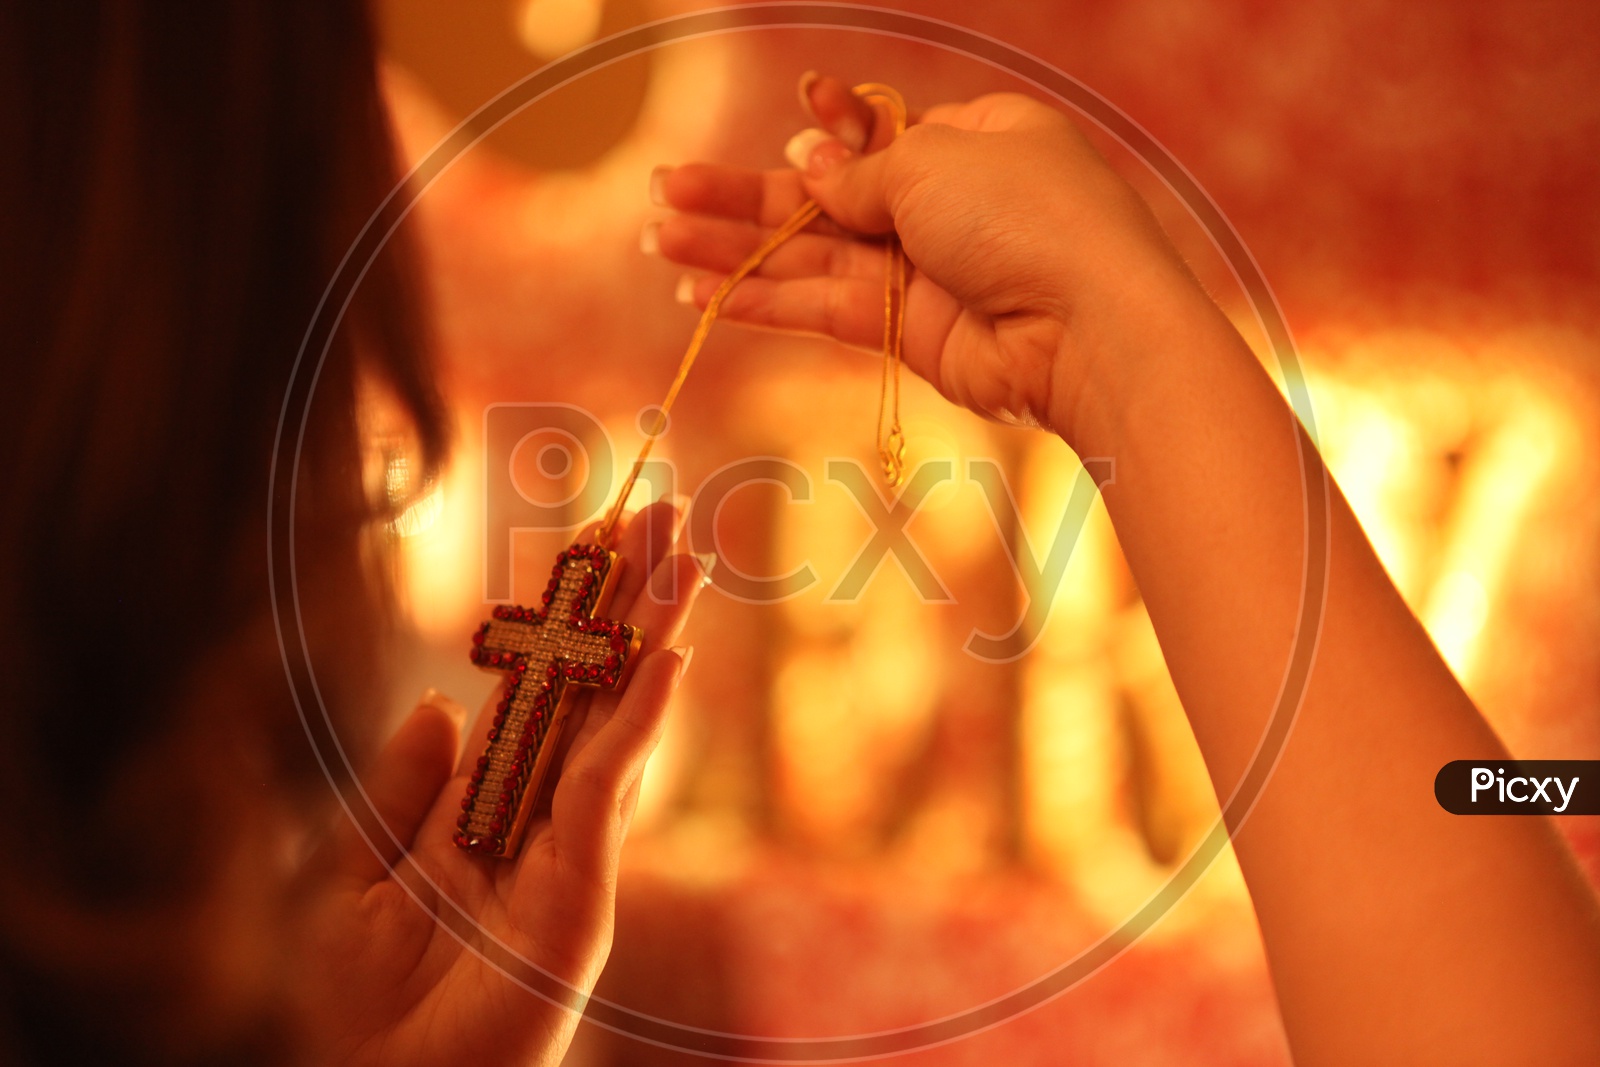 A chain with a Cross locket in a woman hands